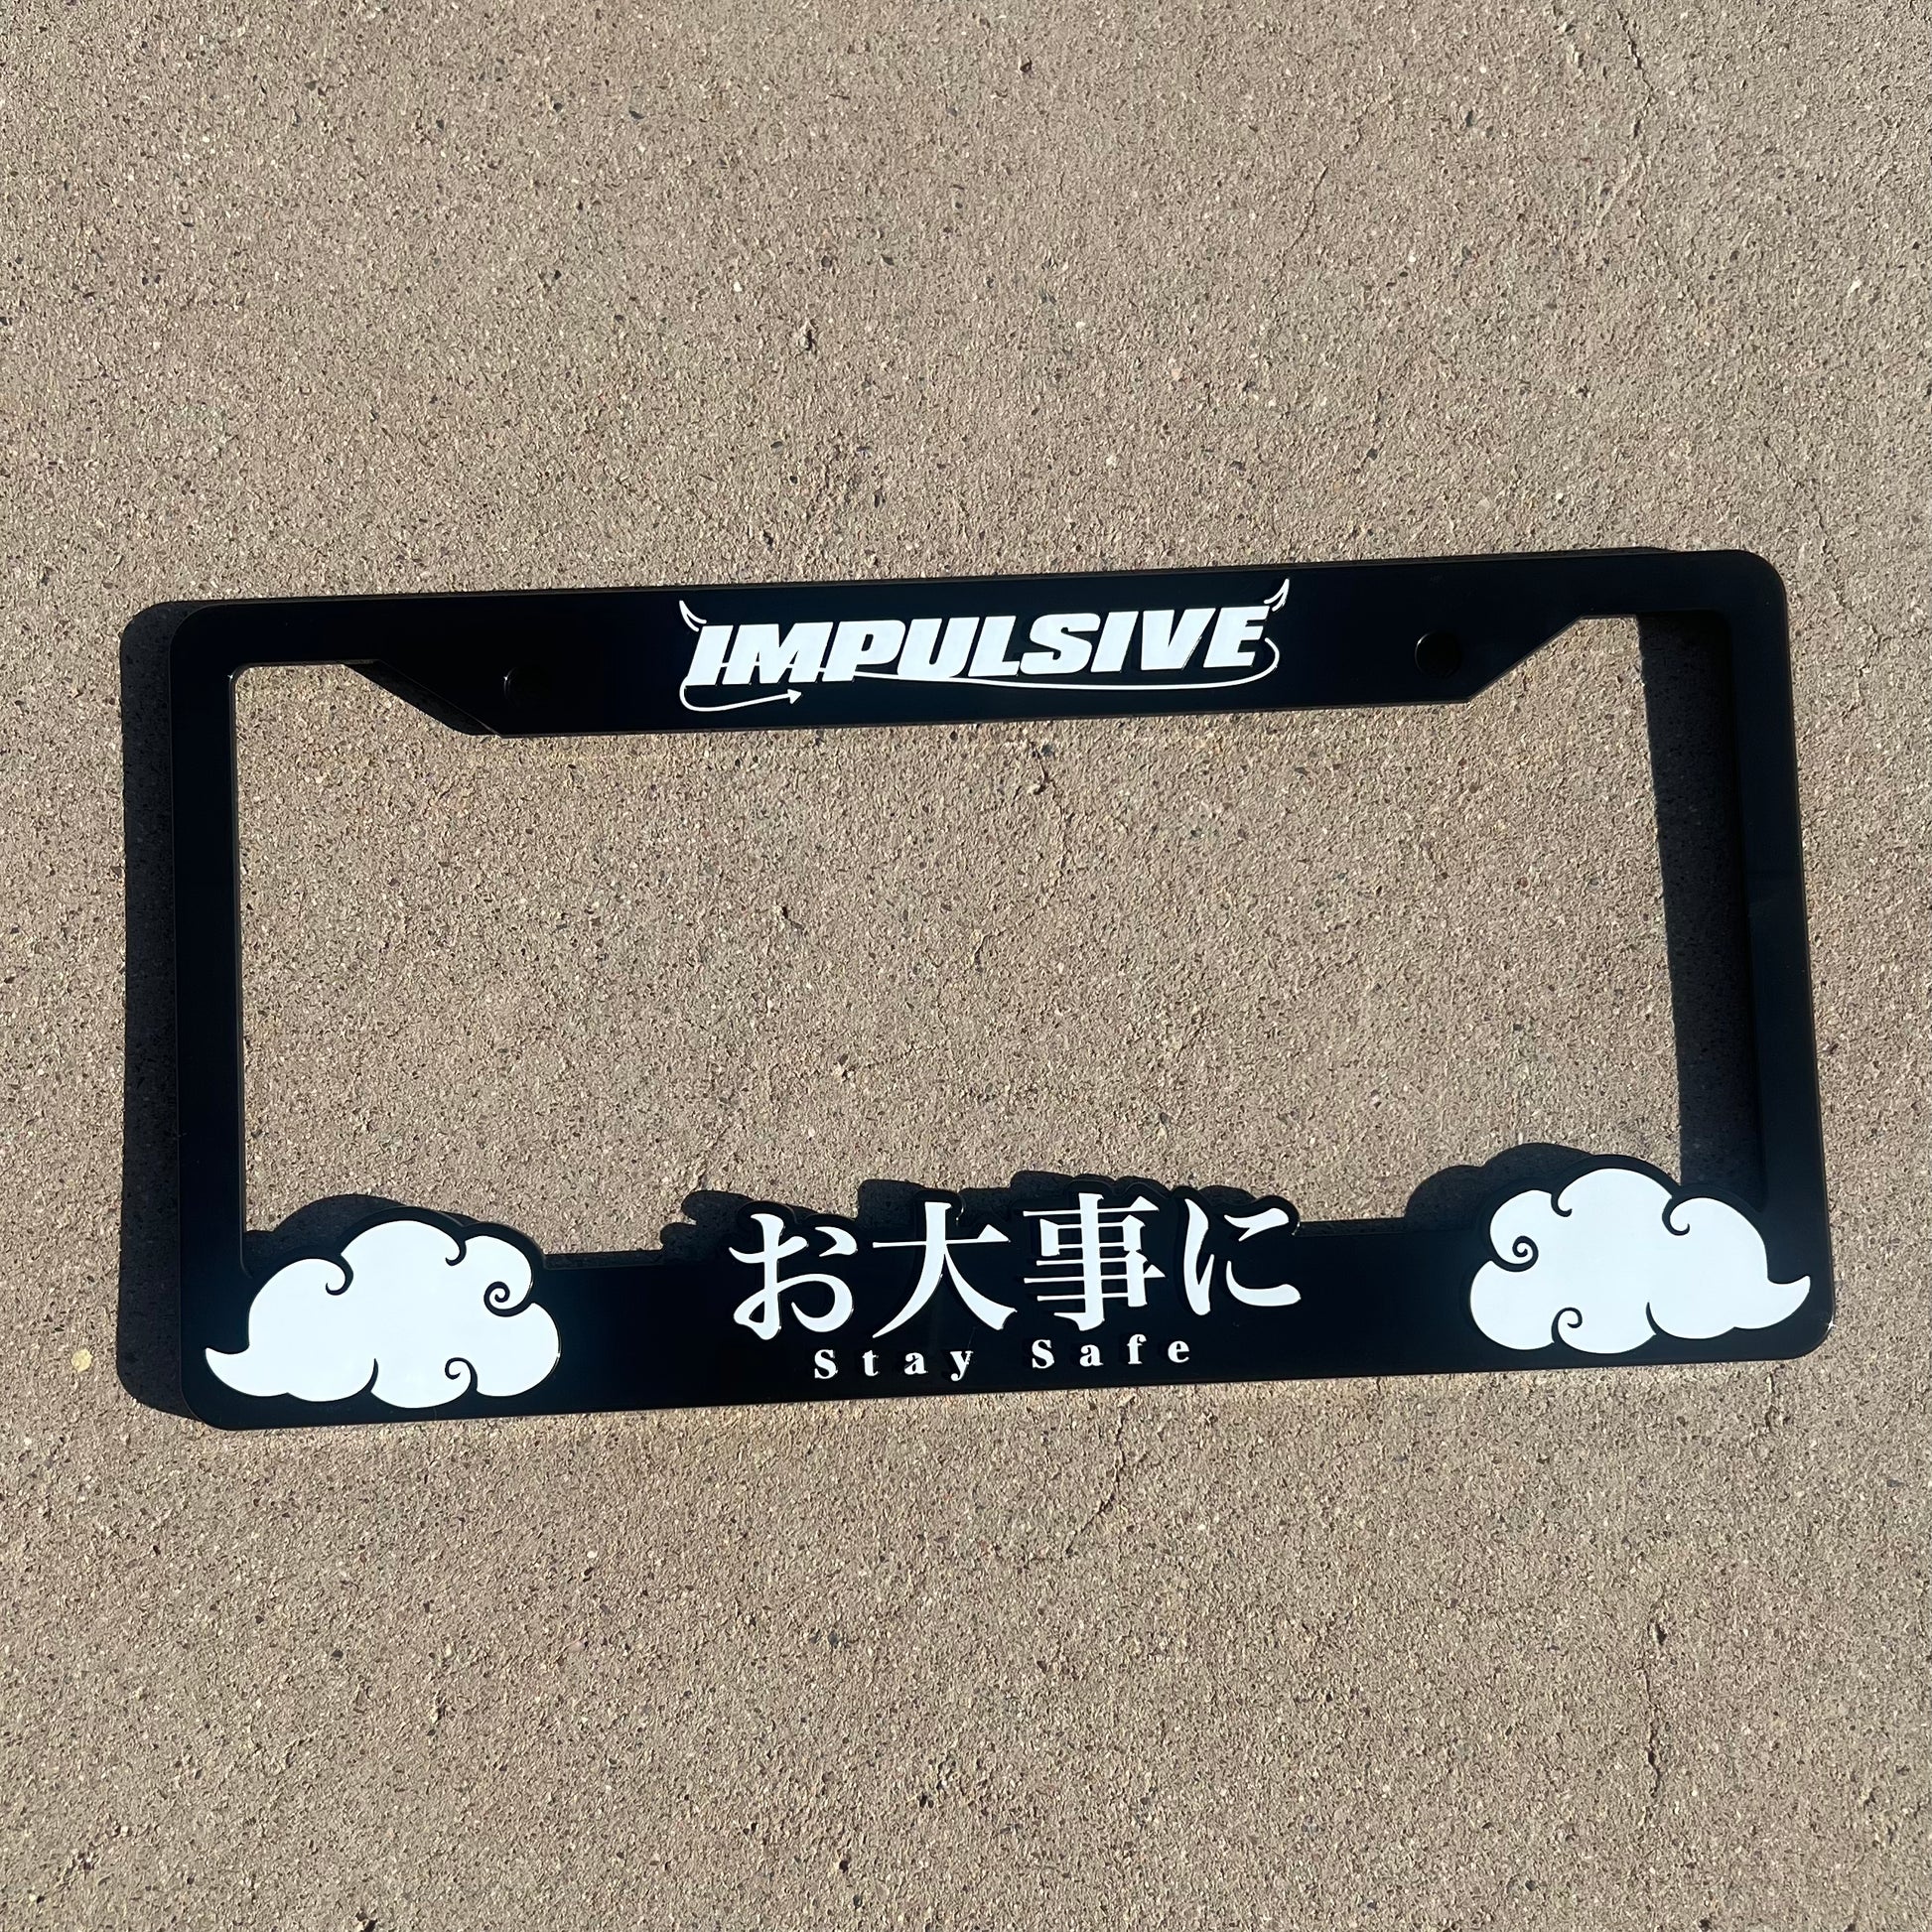 Multiple Japanese anime inspired plastic custom License Plate Frame. Top has Impulsive logo and the bottom has japanese characters and english translated to stay safe surrounding with japanese clouds. Asian inspired. Black Frame with White lettering.